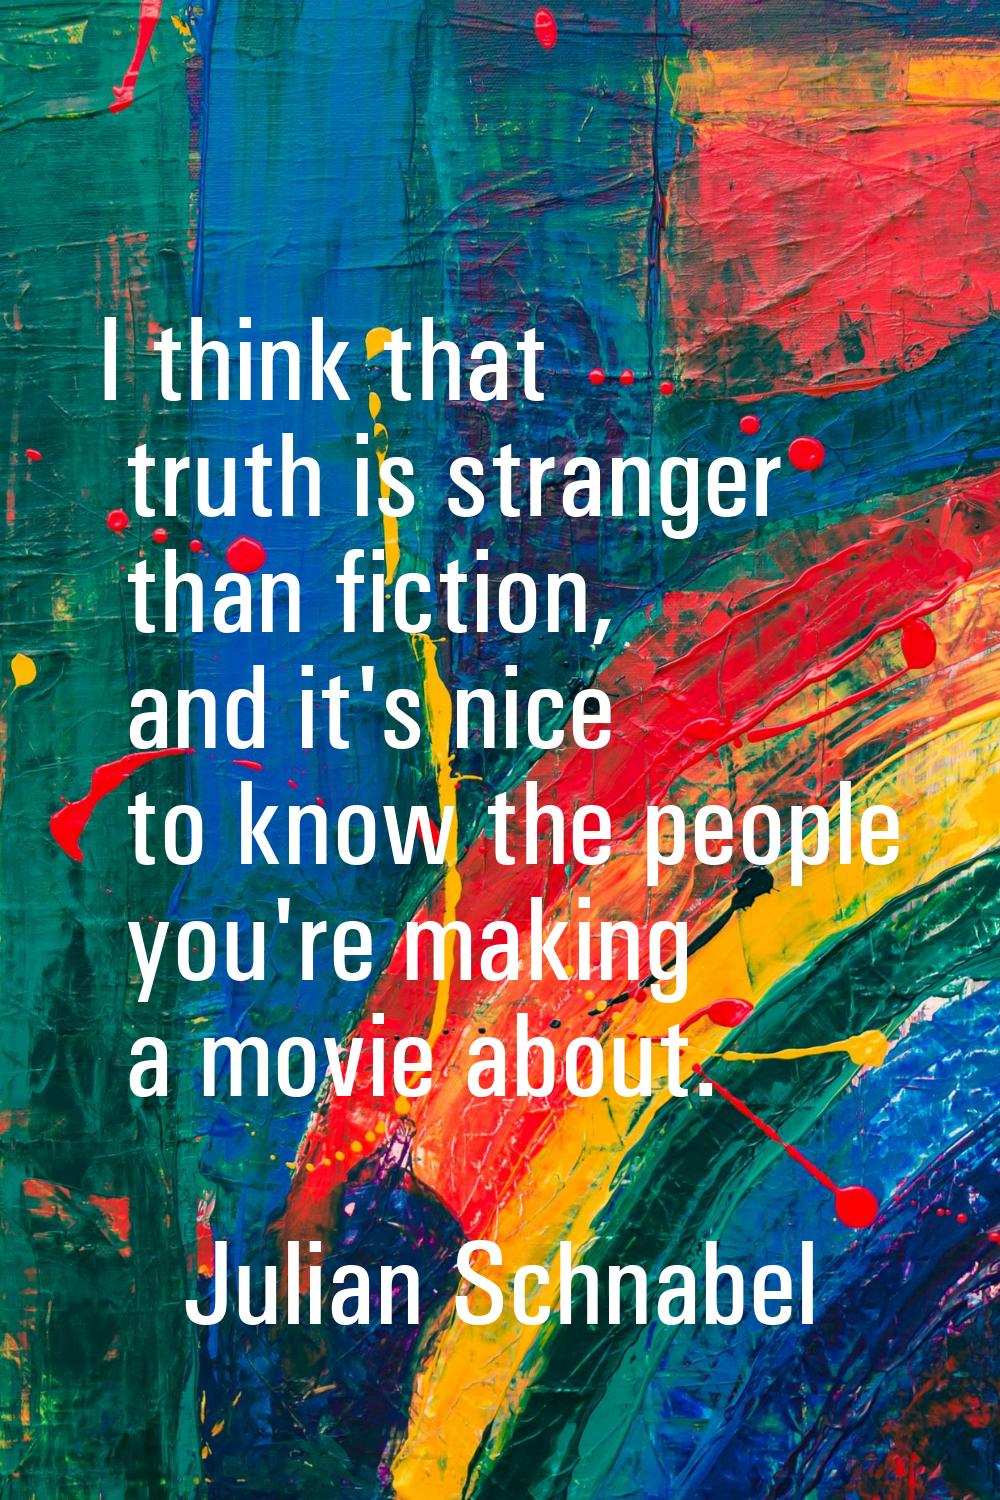 I think that truth is stranger than fiction, and it's nice to know the people you're making a movie